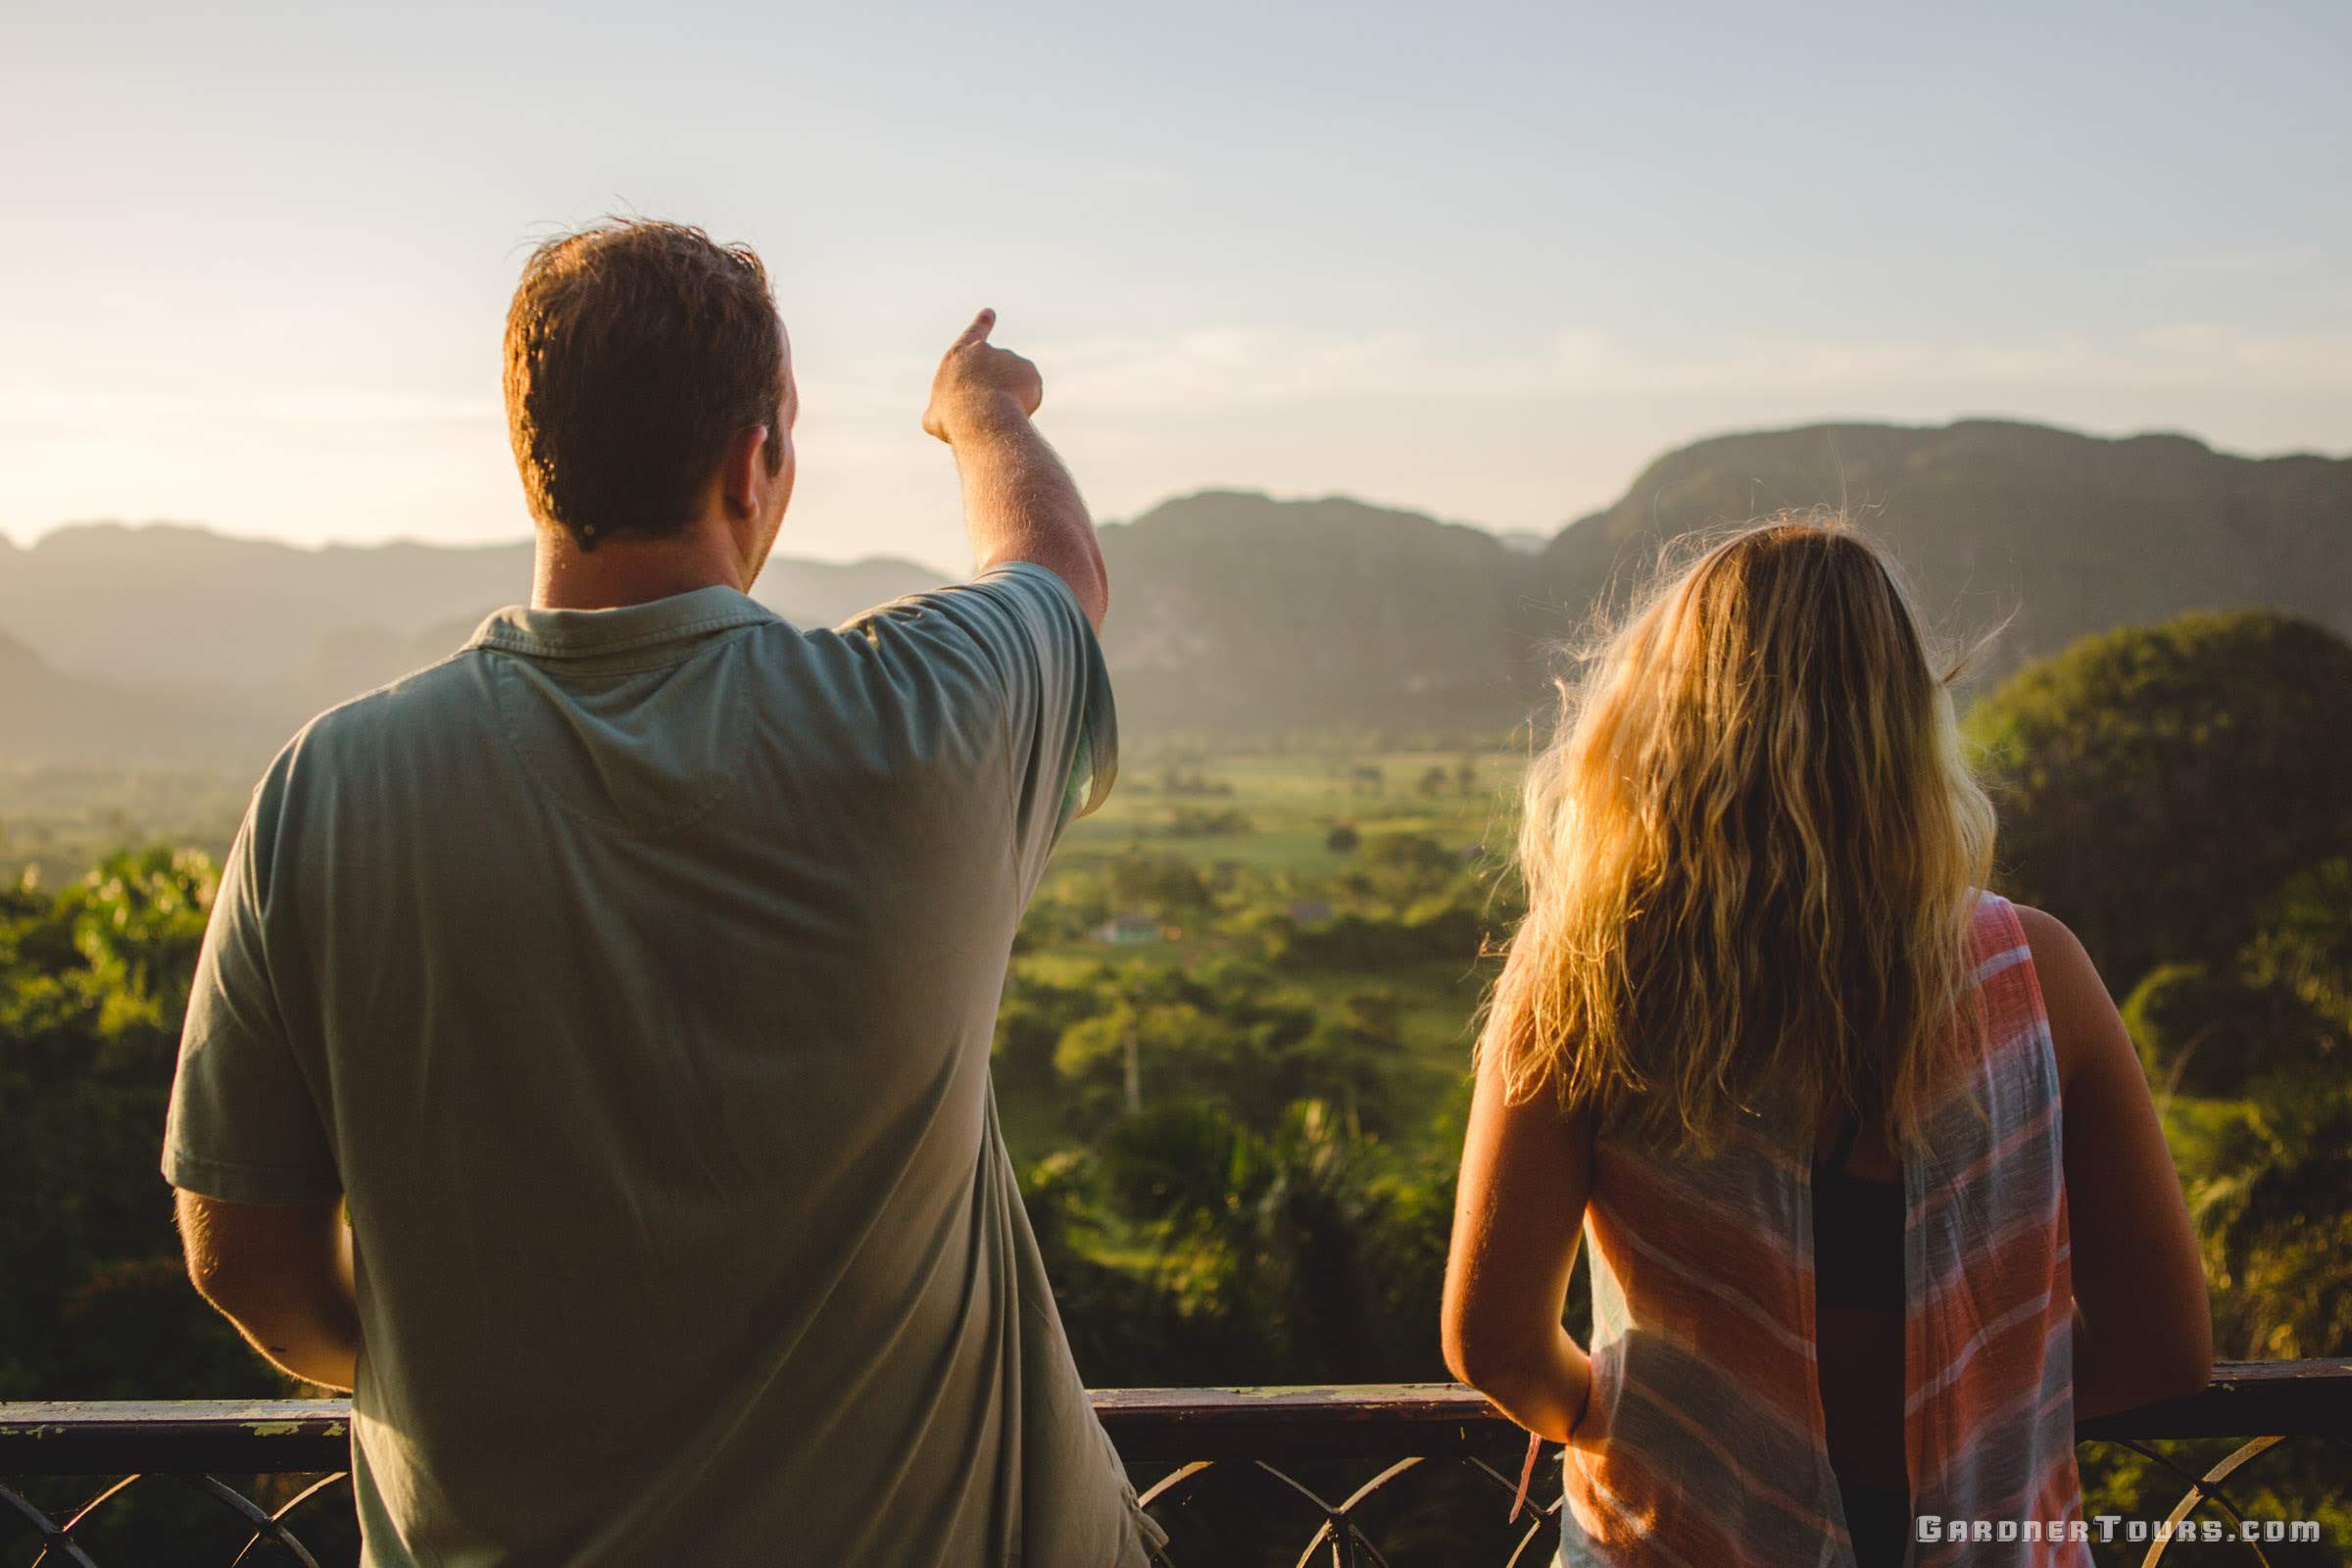 Man Points out over the VIñales Valley with a woman standing next to him at sunset. They are at the Hotel Los Jazmines Viewpoint in Viñales, Cuba